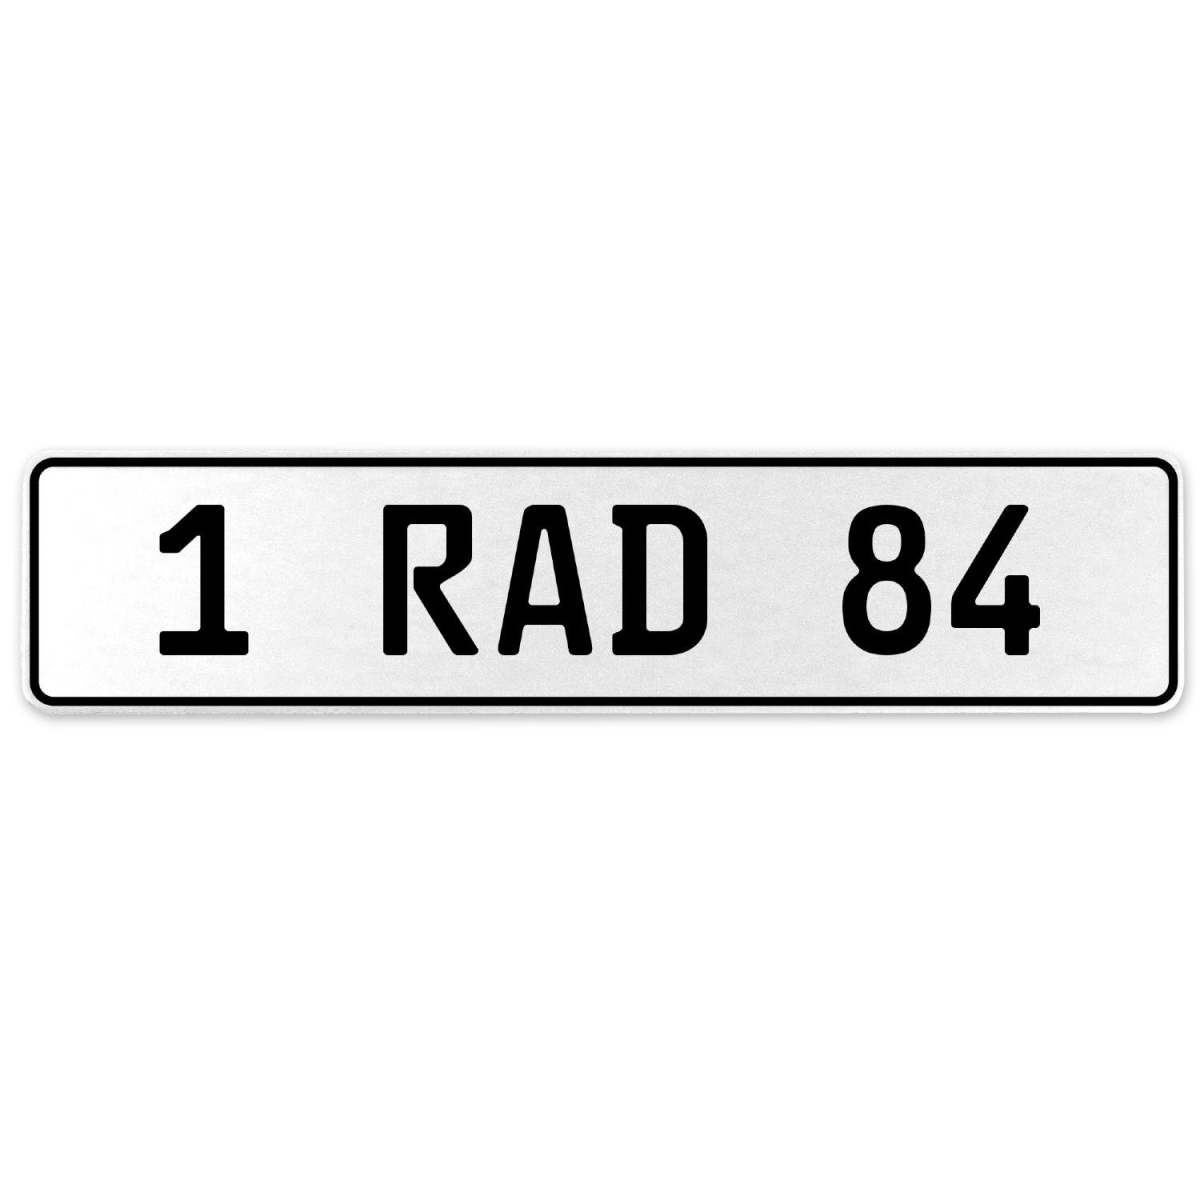 554087 1 Rad 84 - White Aluminum Street Sign Mancave Euro Plate Name Door Sign Wall